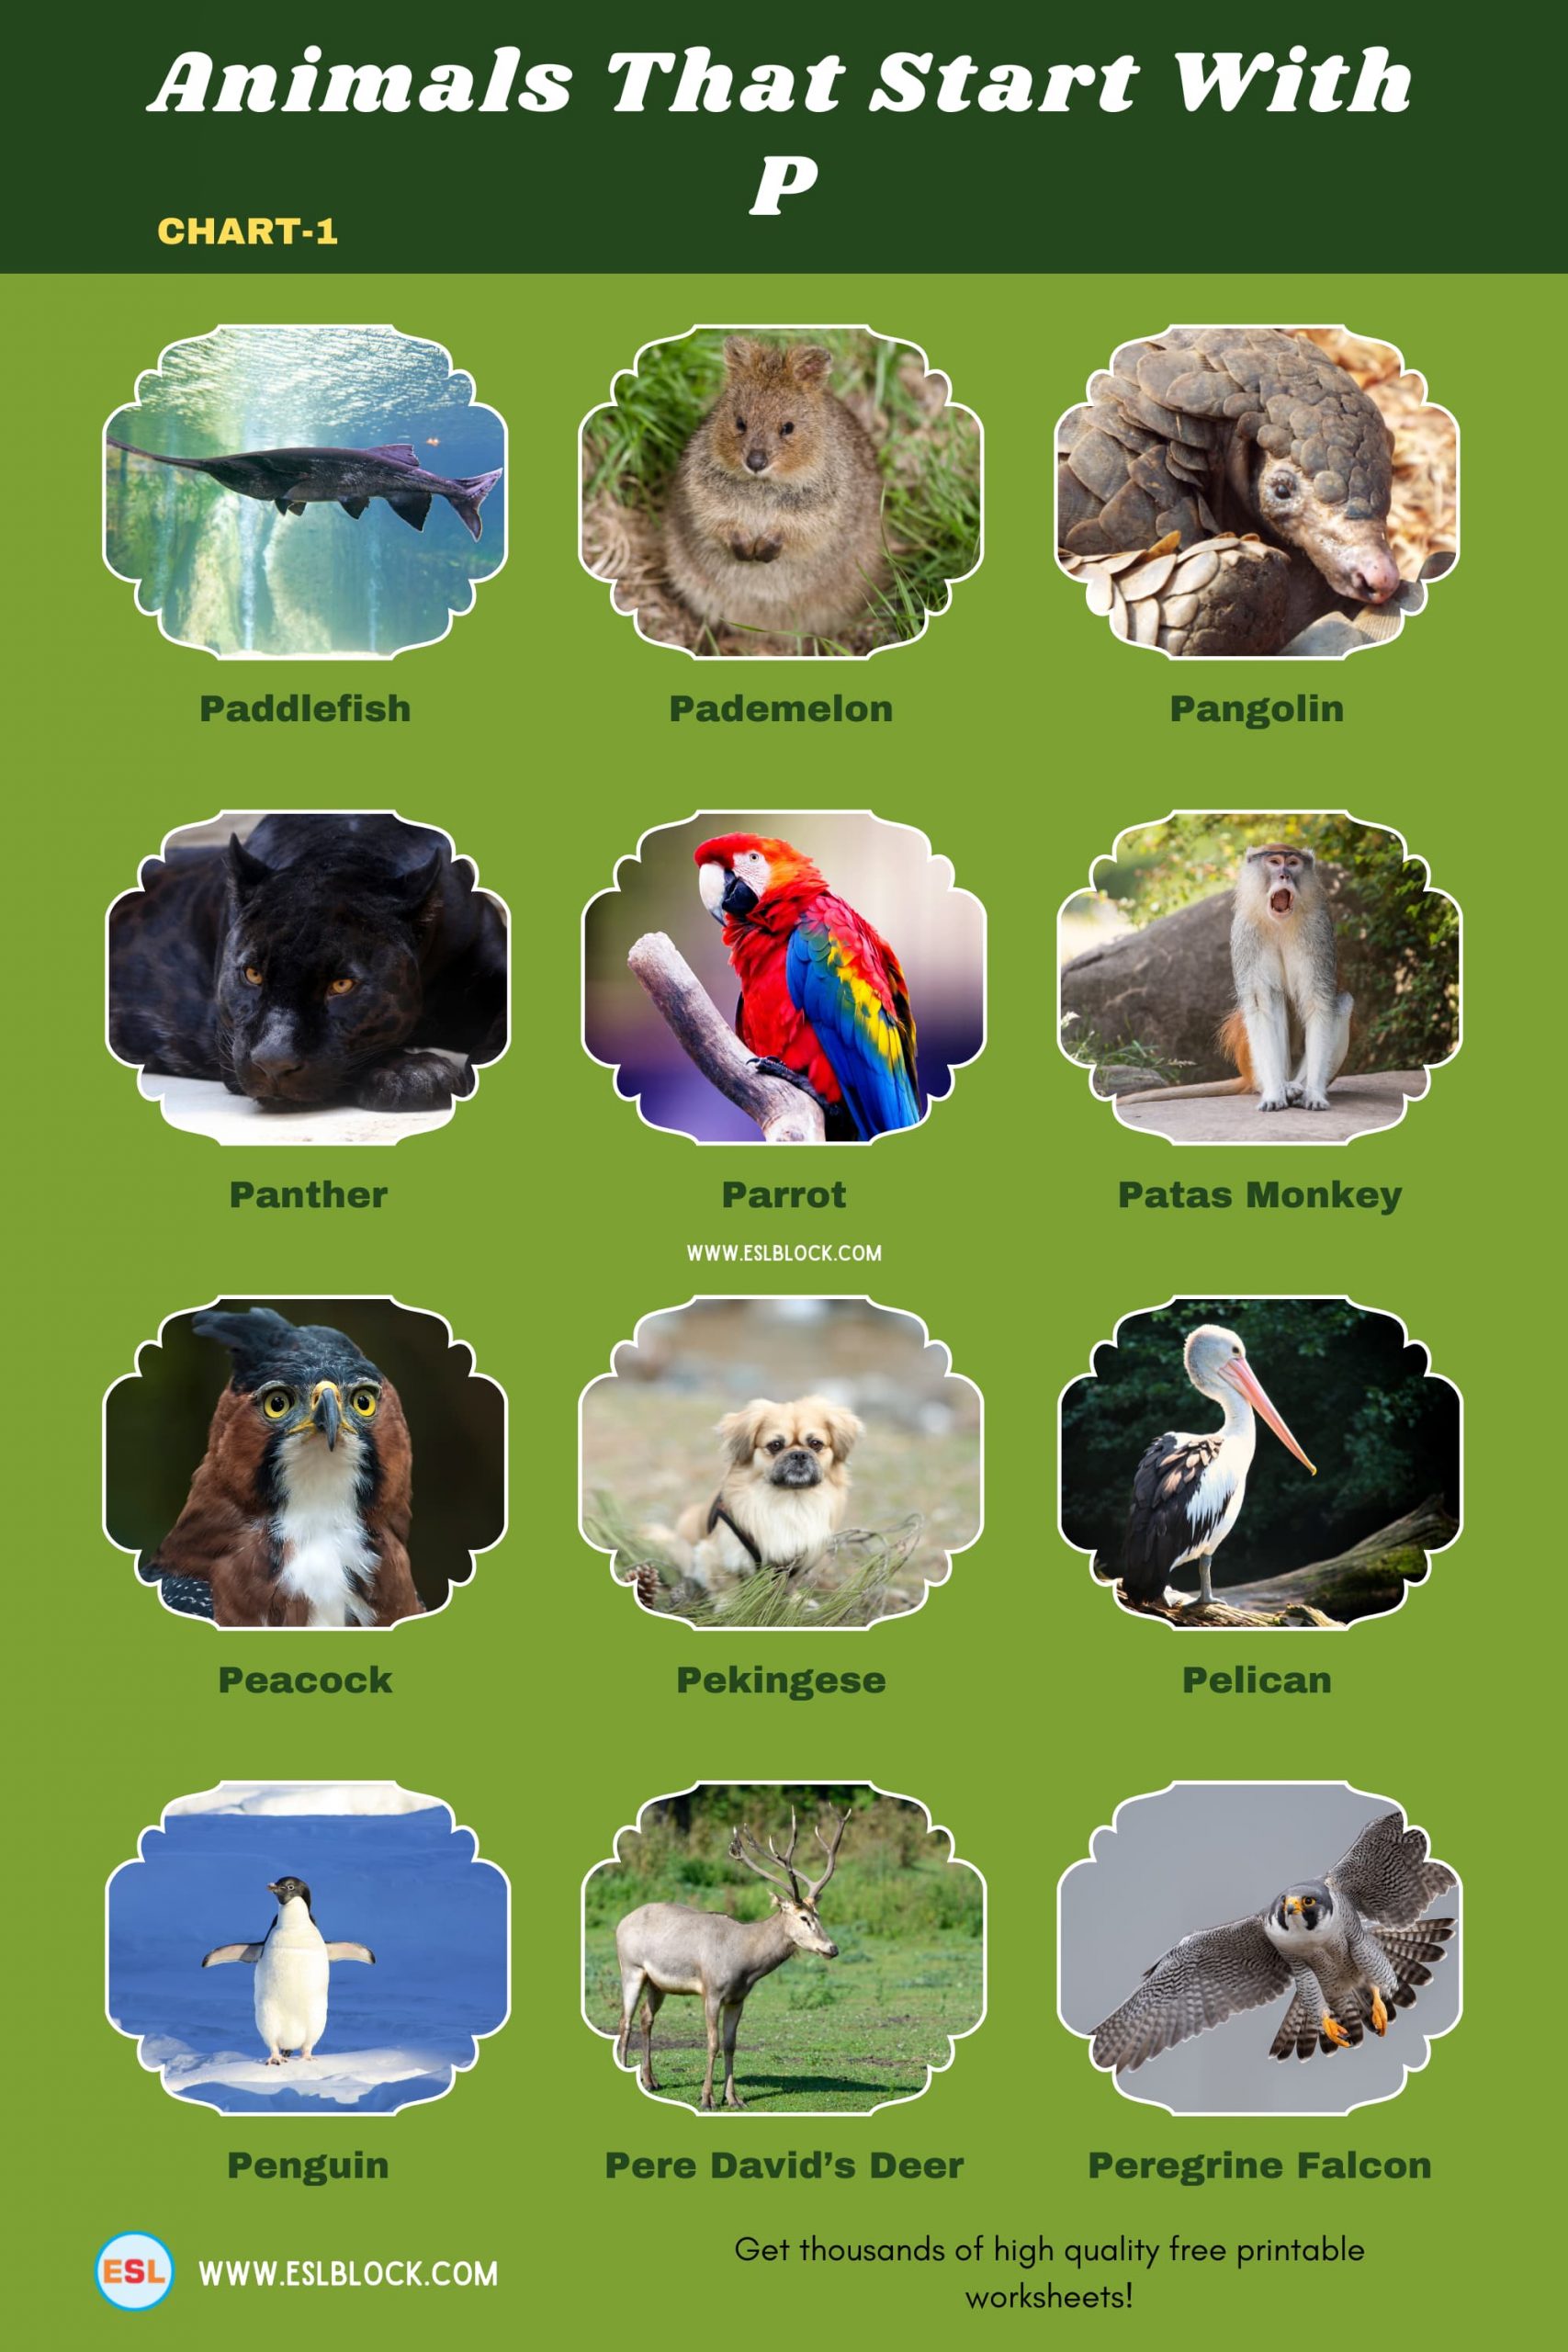 5 Letter Animals Starting With P, Animals List, Animals Names, Animals That Begins With P, Animals That Start With P, English, English Nouns, English Vocabulary, English Words, List of Animals That Start With P, Nouns, P Animals, P Animals in English, P Animals Names, Vocabulary